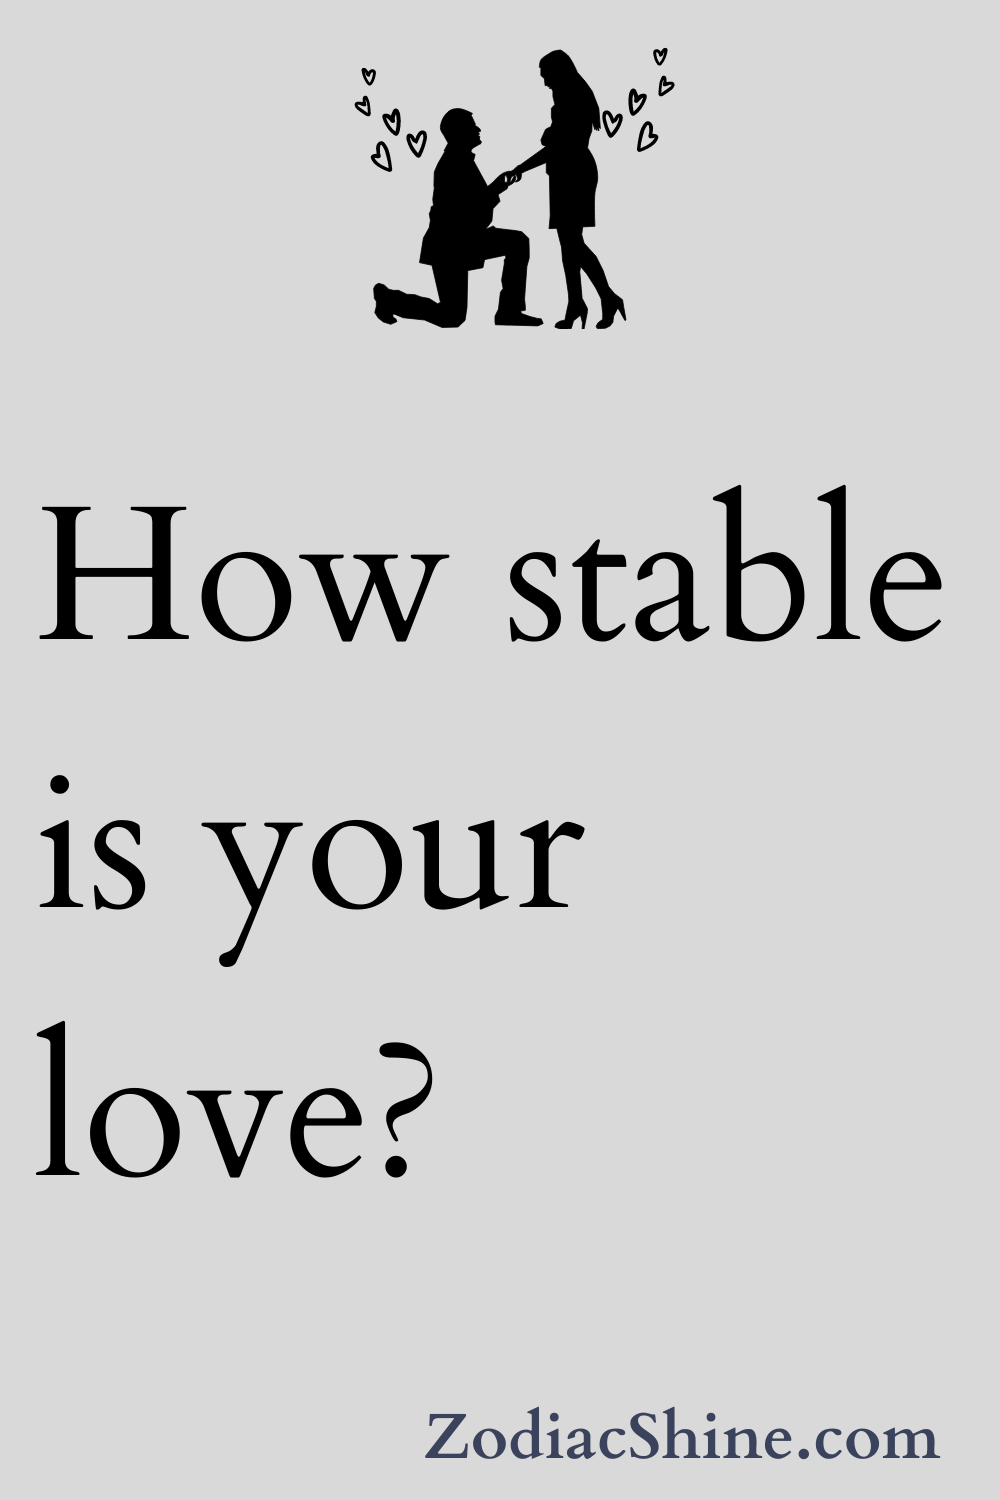 How stable is your love?